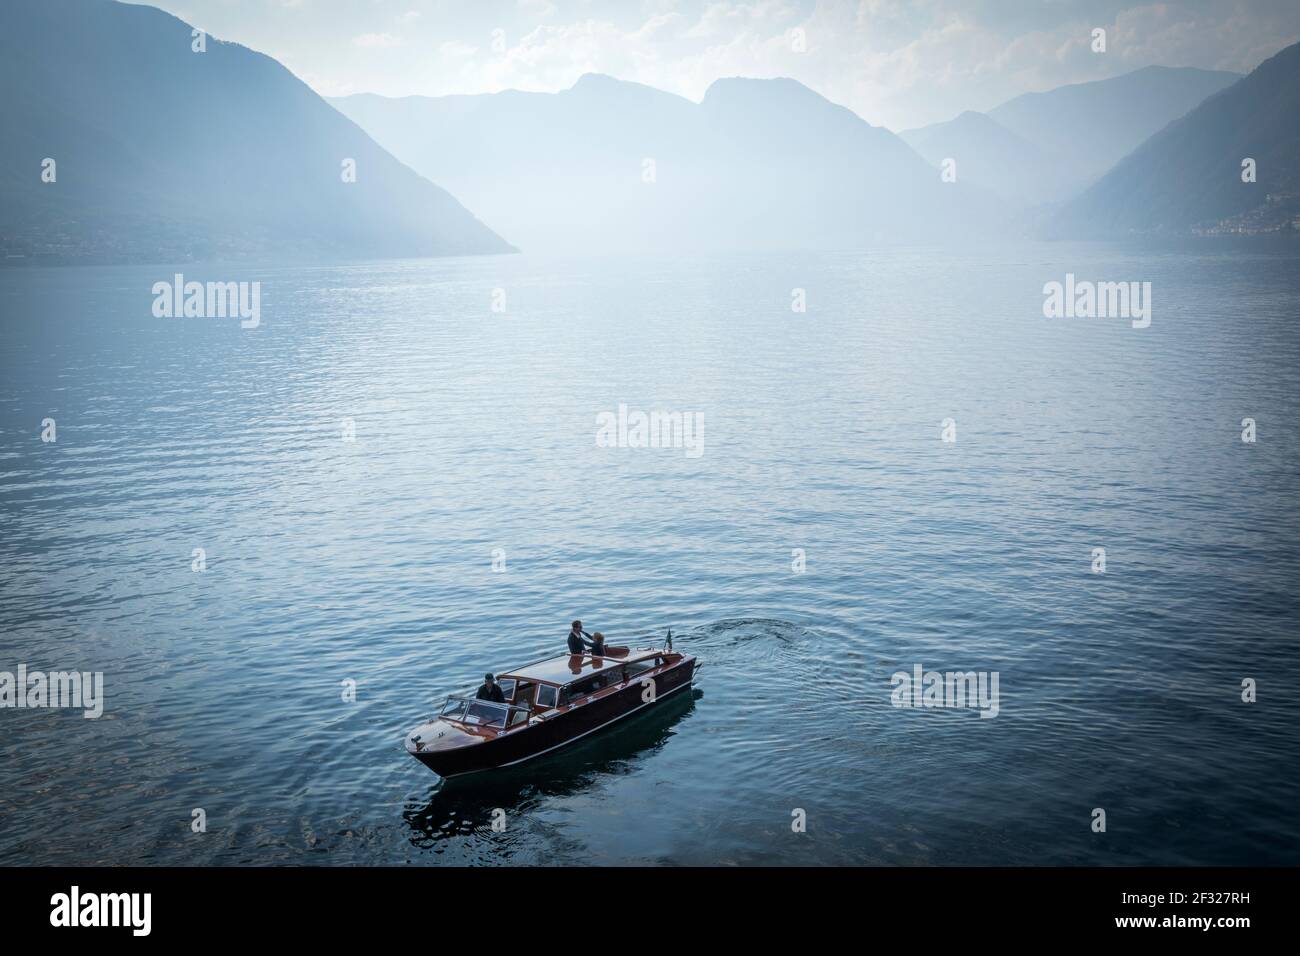 Italy, Lombardy, Lenno, view of Lake Como from Villa del Balbianello, couple embracing on a wooden speedboat Stock Photo